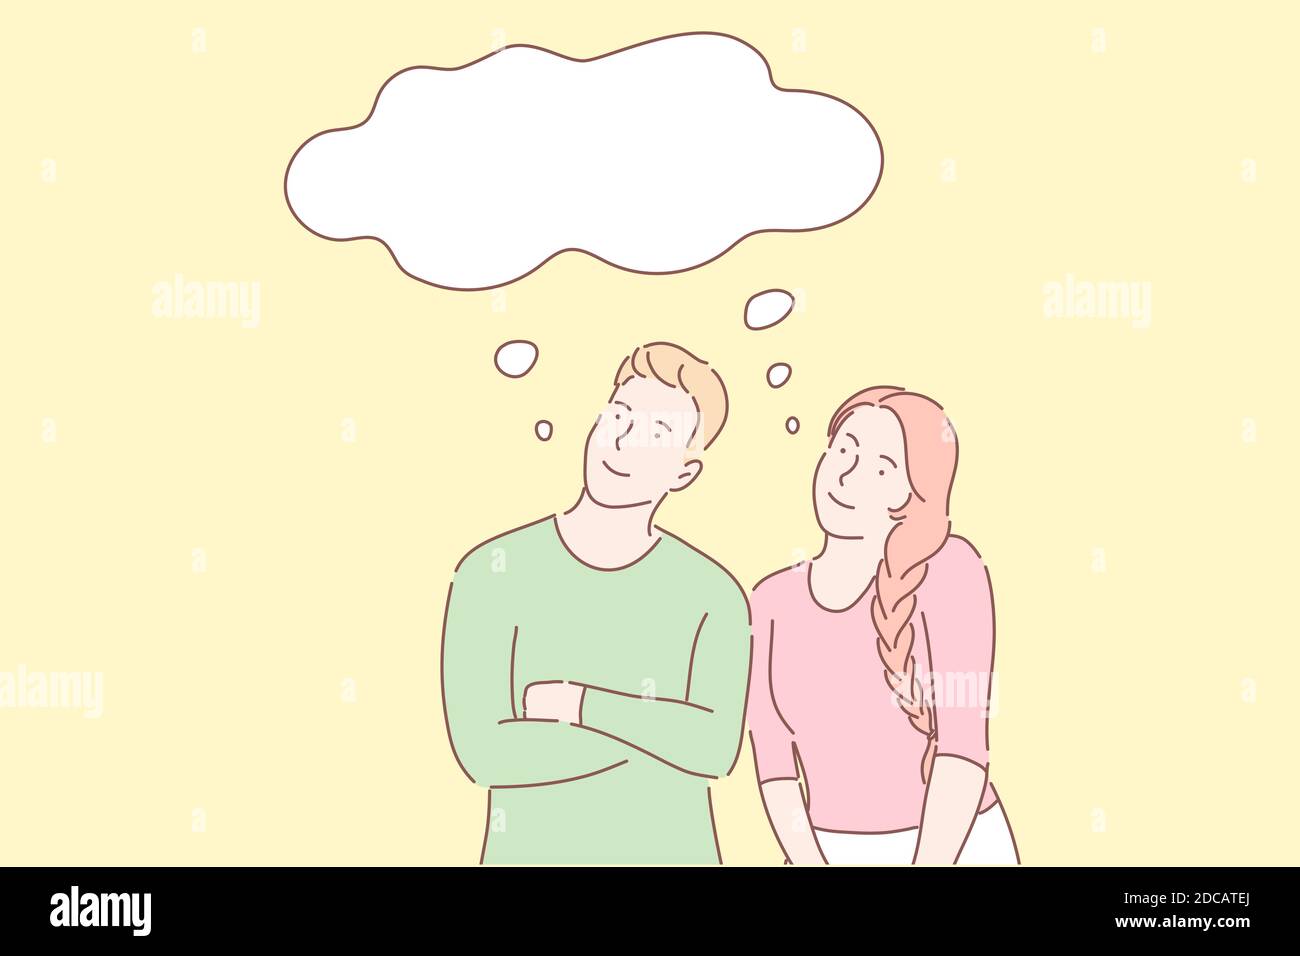 Common dreams, similar thoughts, sharing views concept. Happy family couple having same plans. Daydreaming metaphor. Boyfriend and girlfriend total un Stock Vector